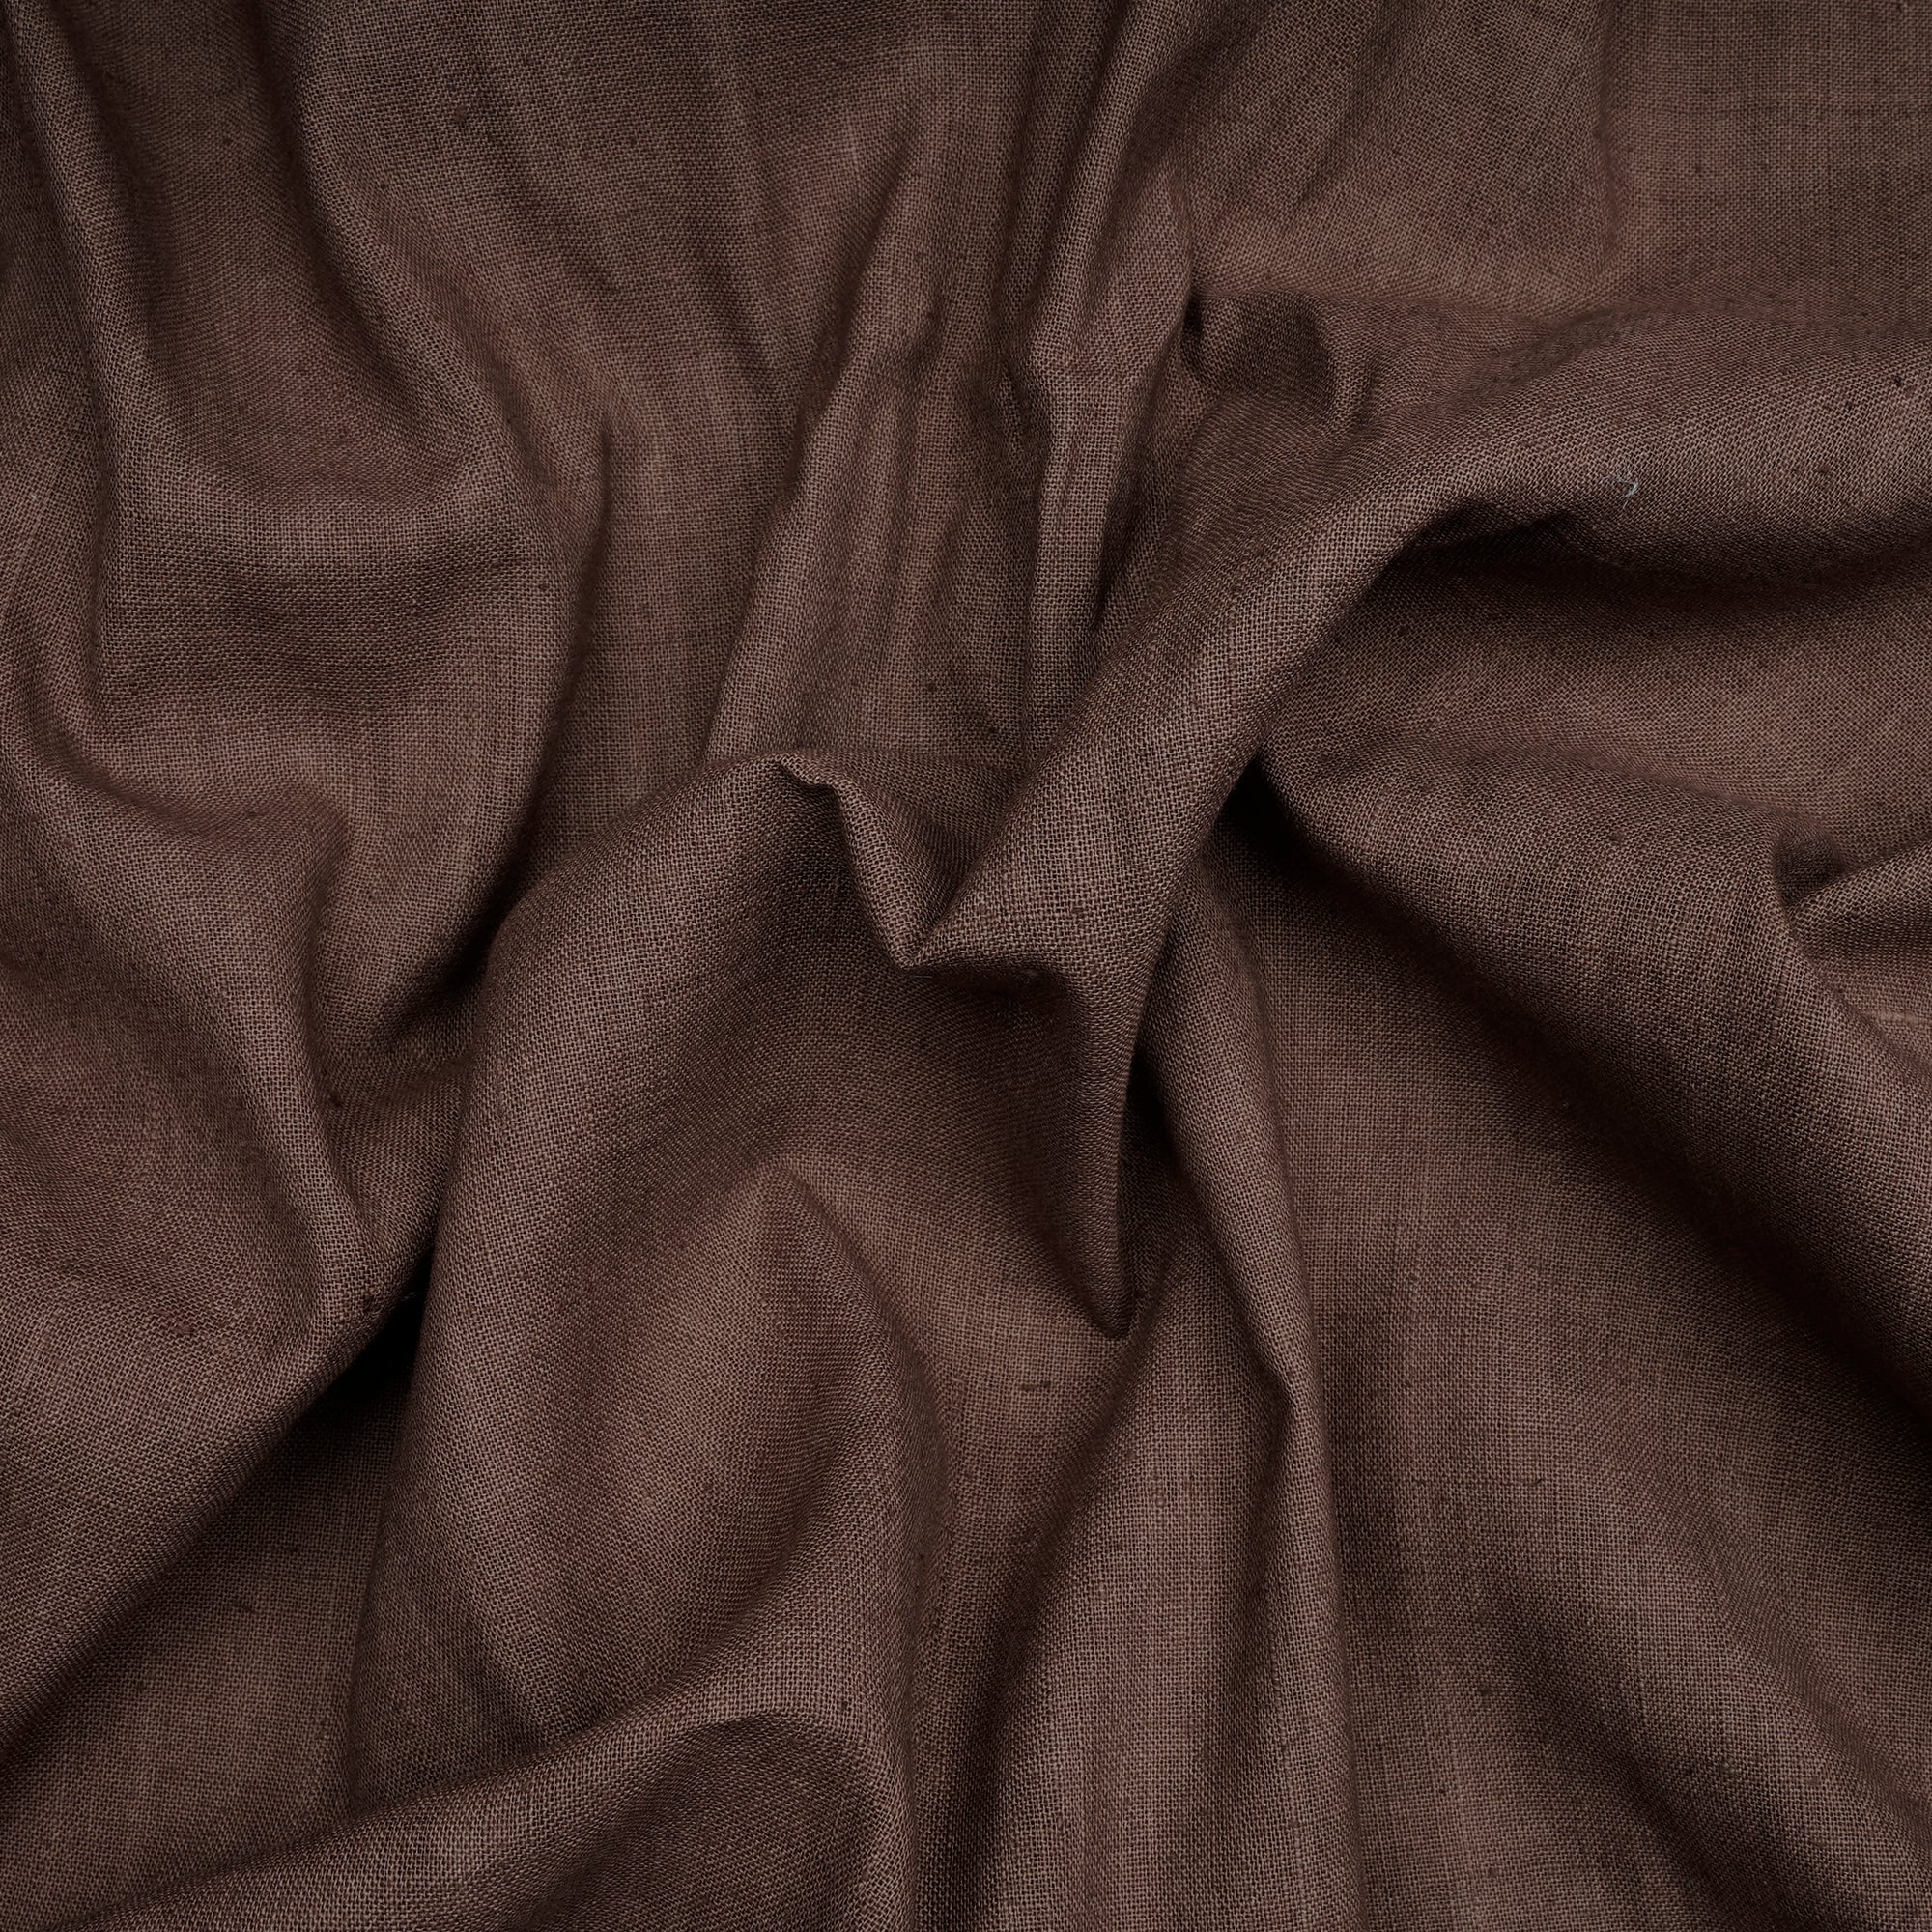 Cocoa Brown 40's Count Piece Dyed Handspun Handwoven Cotton Fabric